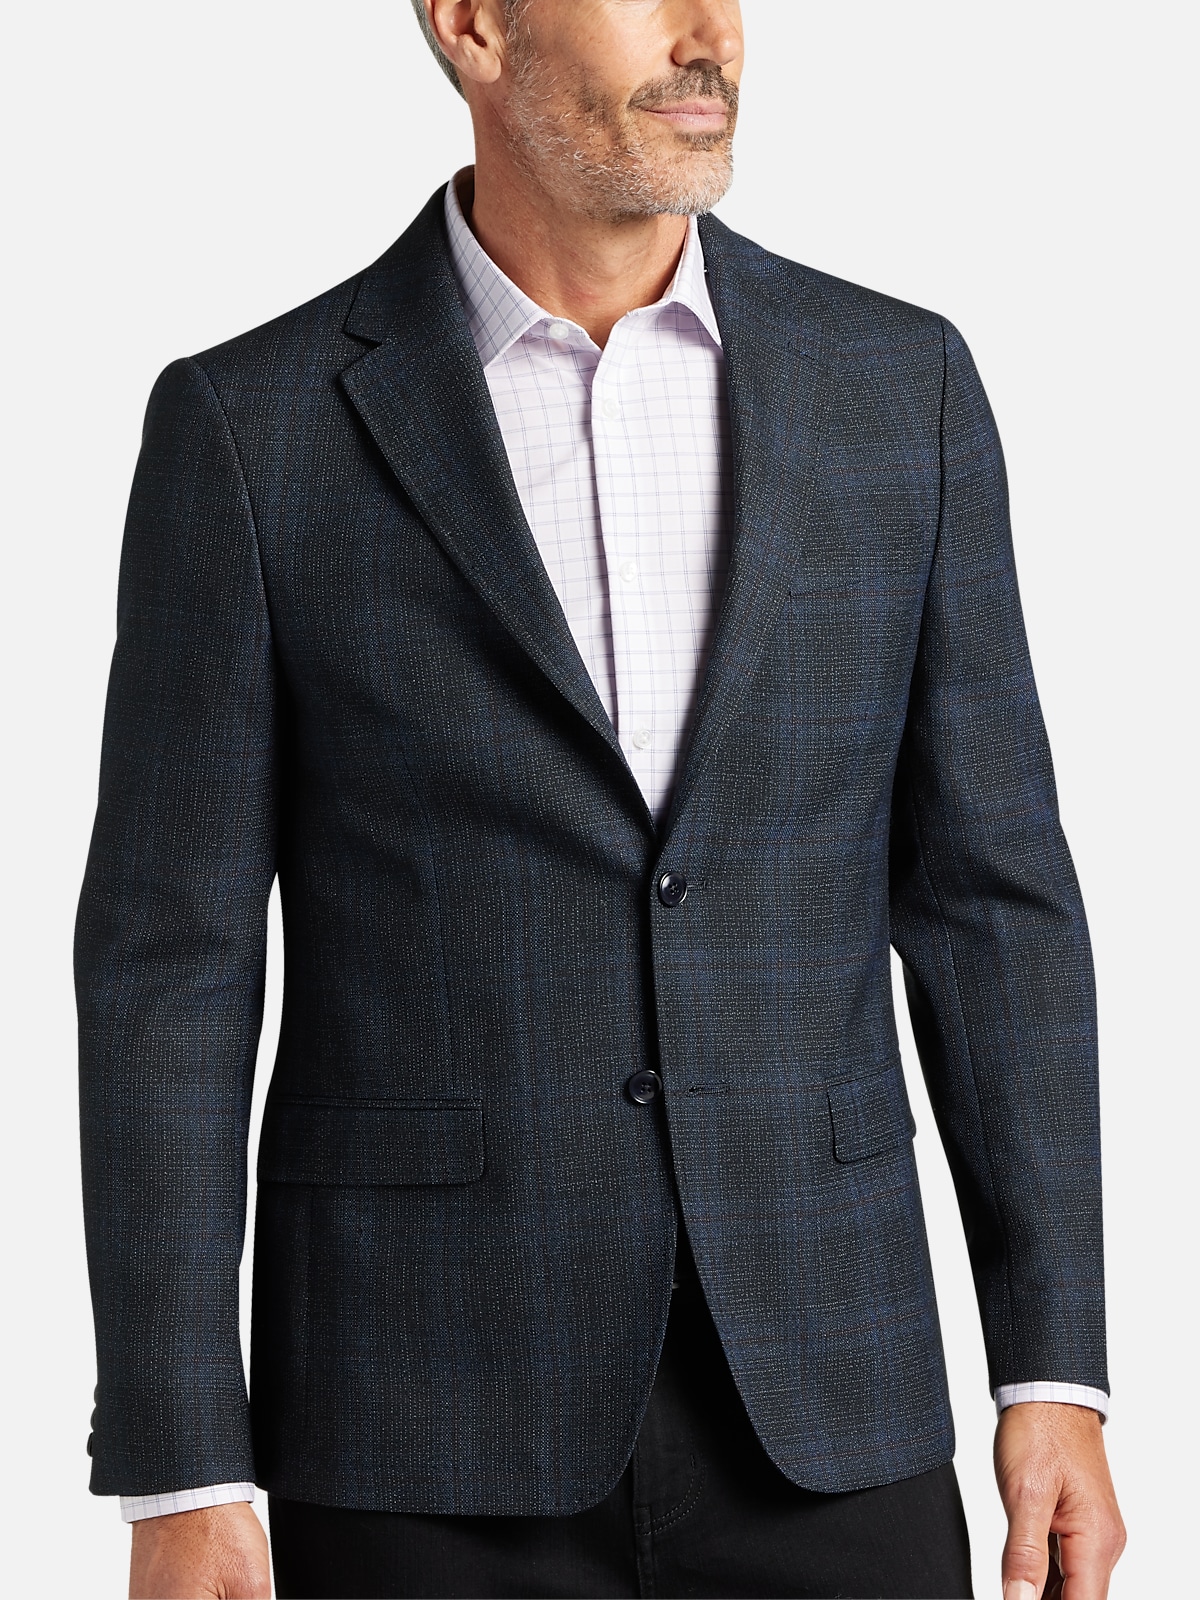 https://image.menswearhouse.com/is/image/TMW/TMW_16R0_94_CALVIN_KLEIN_SPORT_COATS_NAVY_PLAID_MAIN?imPolicy=pdp-zoom-mob